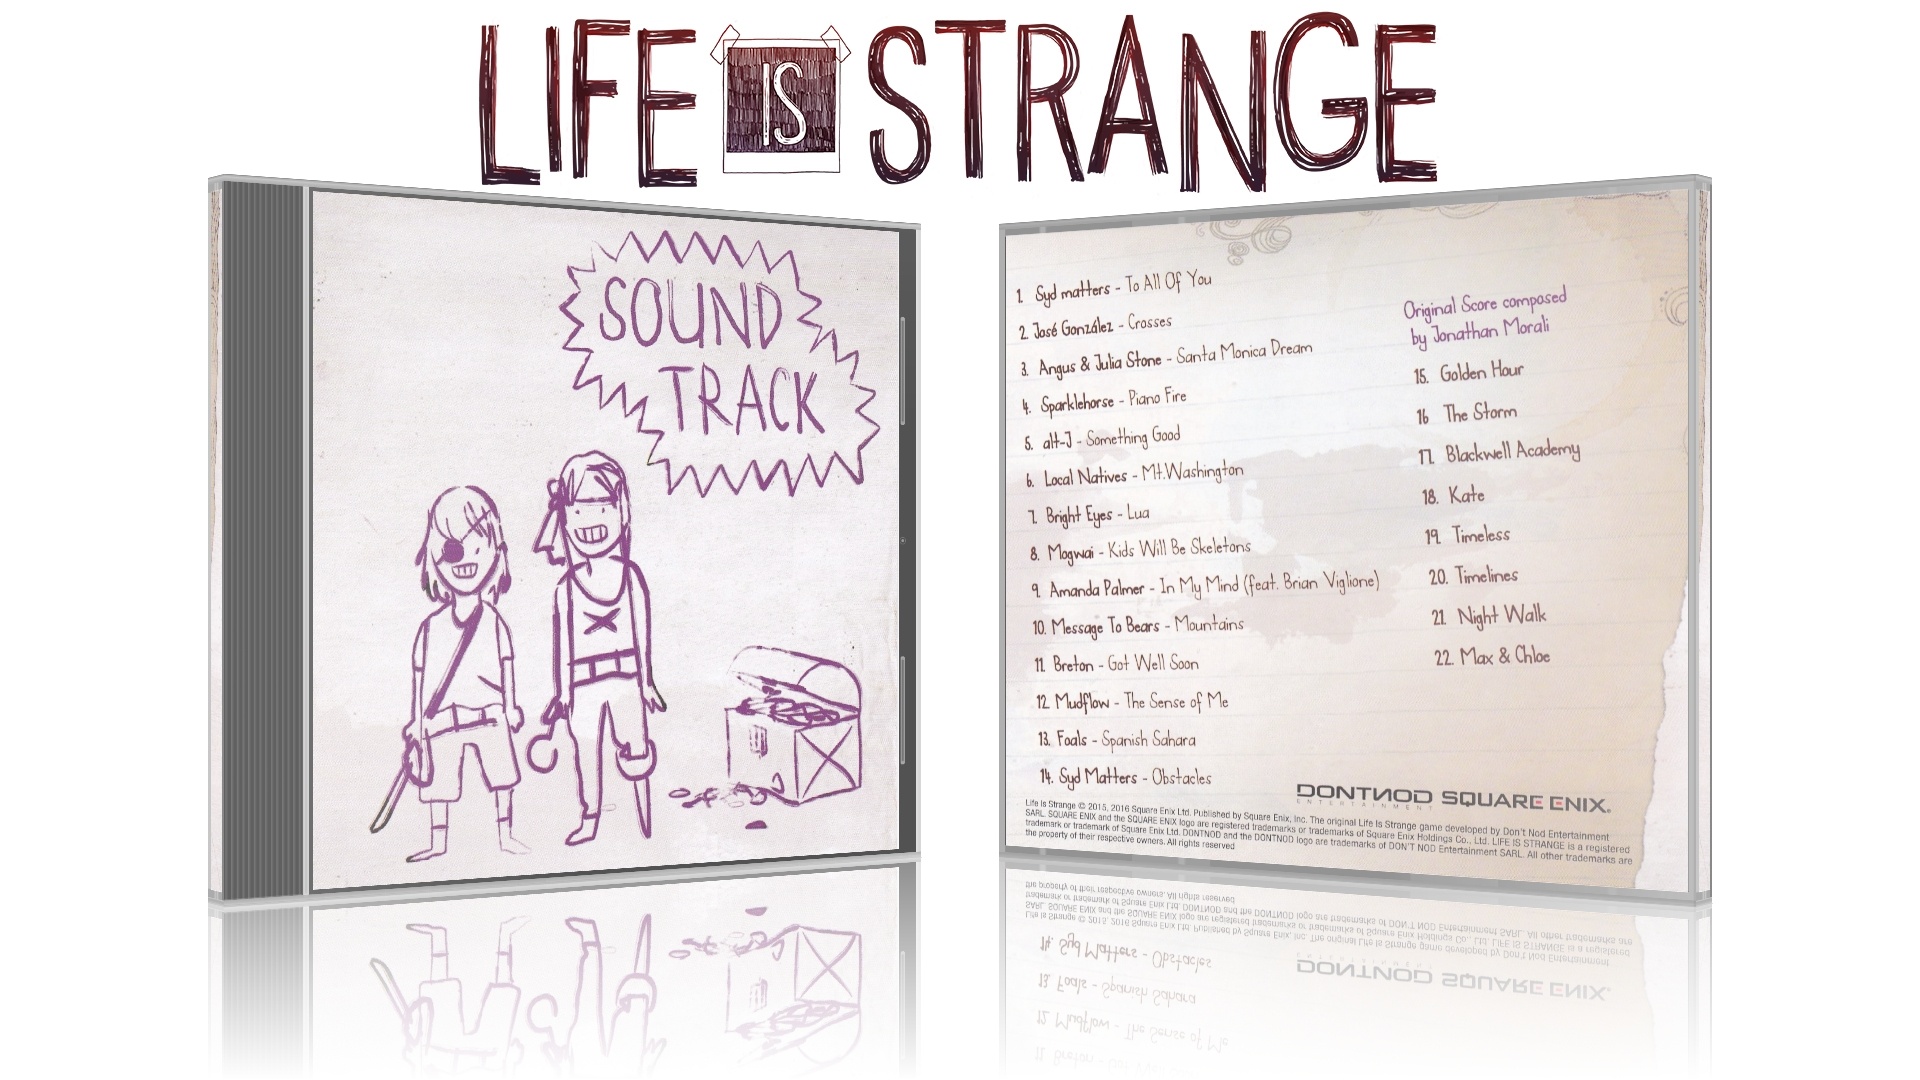 They started life a. Life is Strange OST. Энциклопедия Life is Strange. Life is Strange диалоги. Ноты Life is Strange.